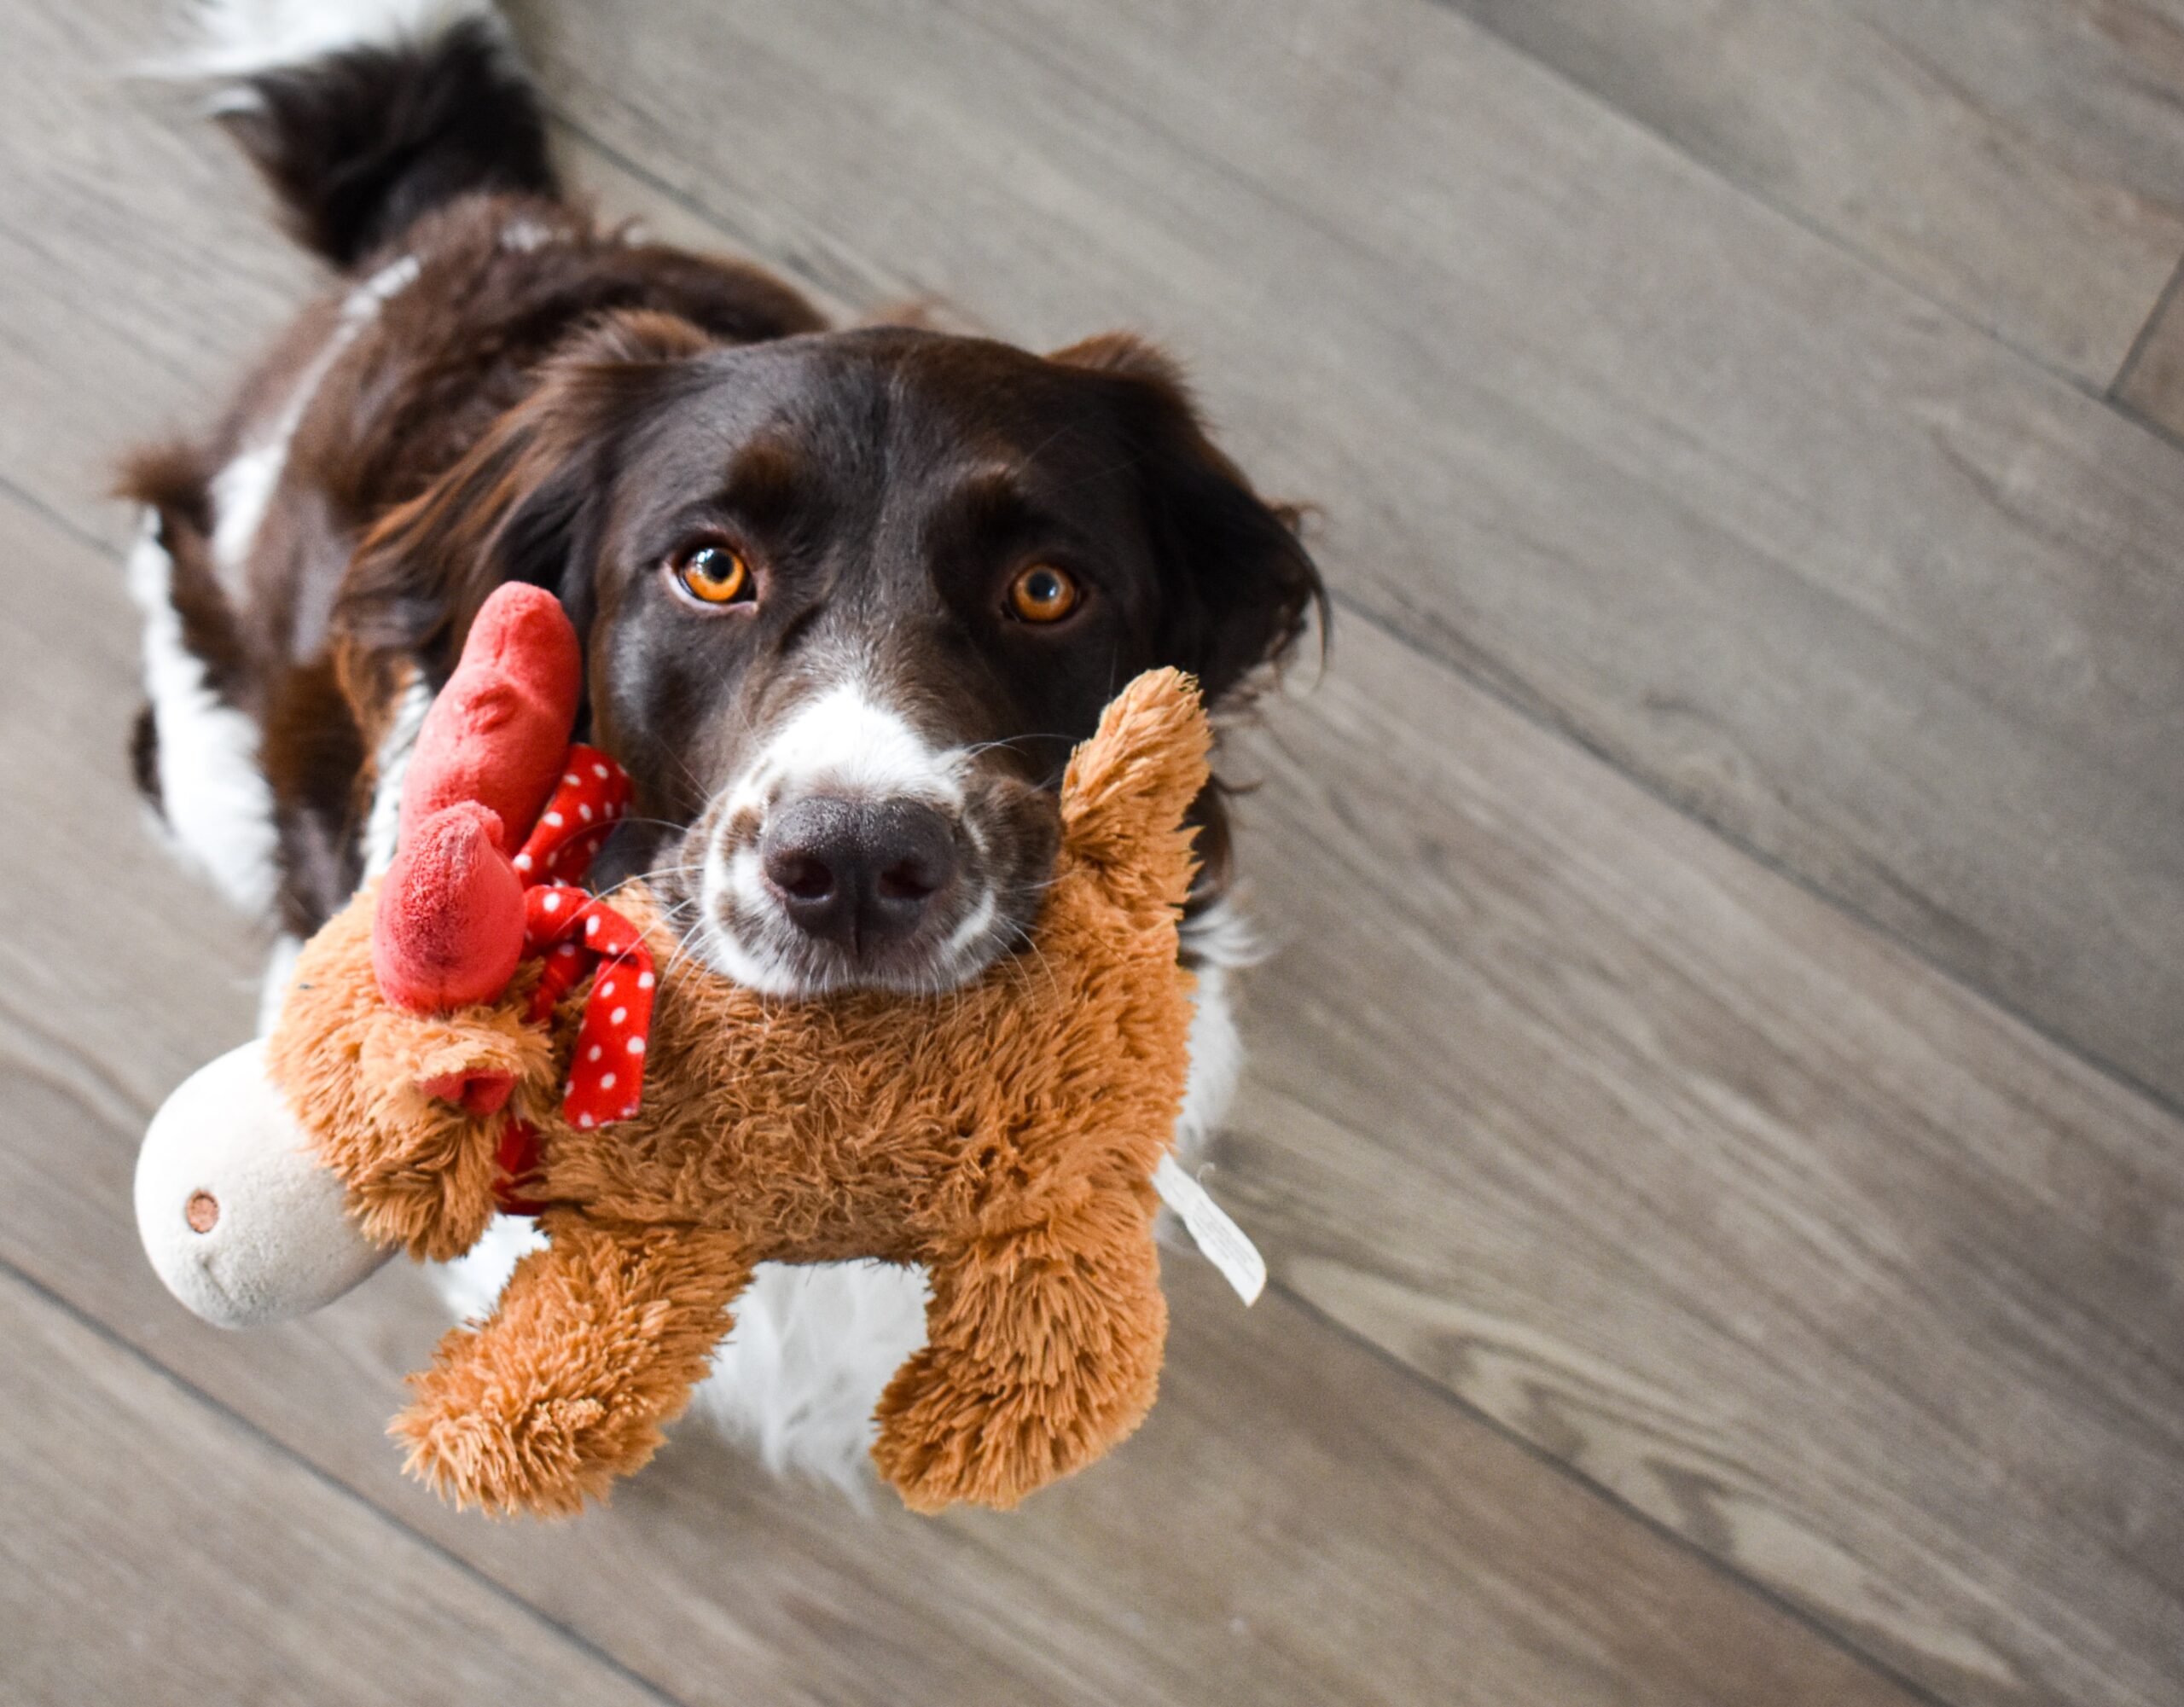 Some of the best chew toys for my pet include soft stuffed animals and rope toys.